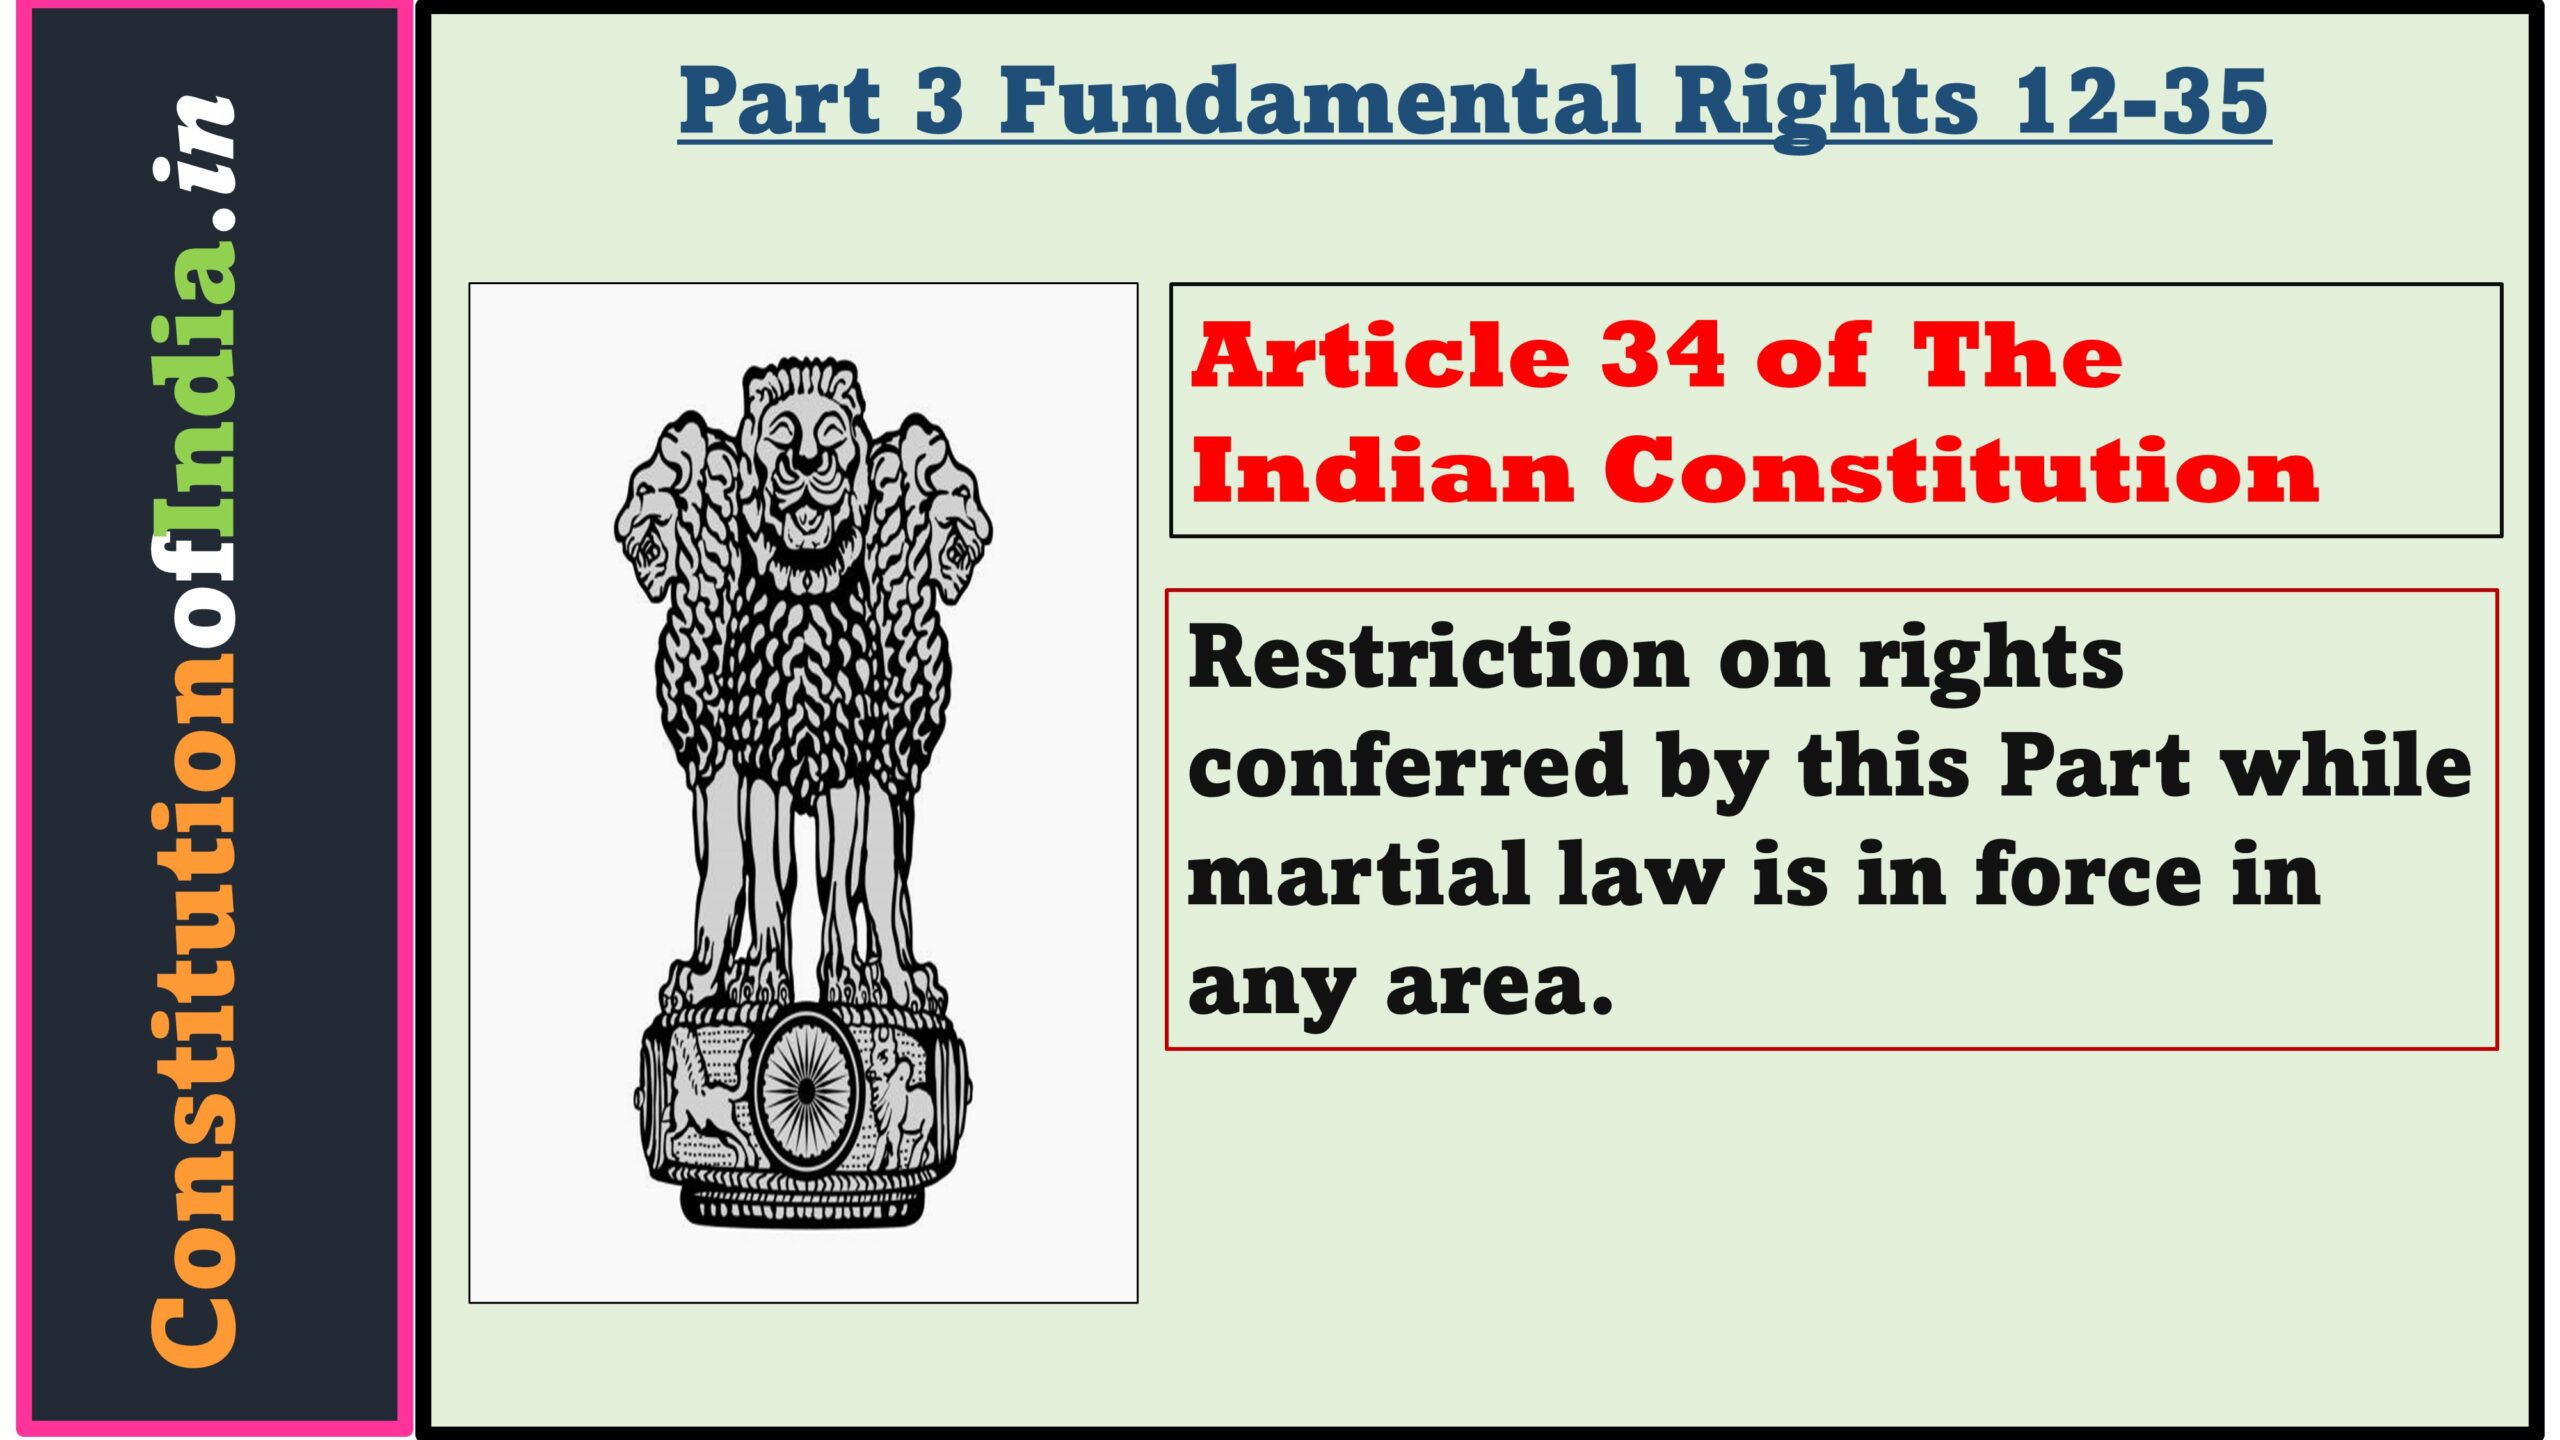 Article 34 of Indian Constitution